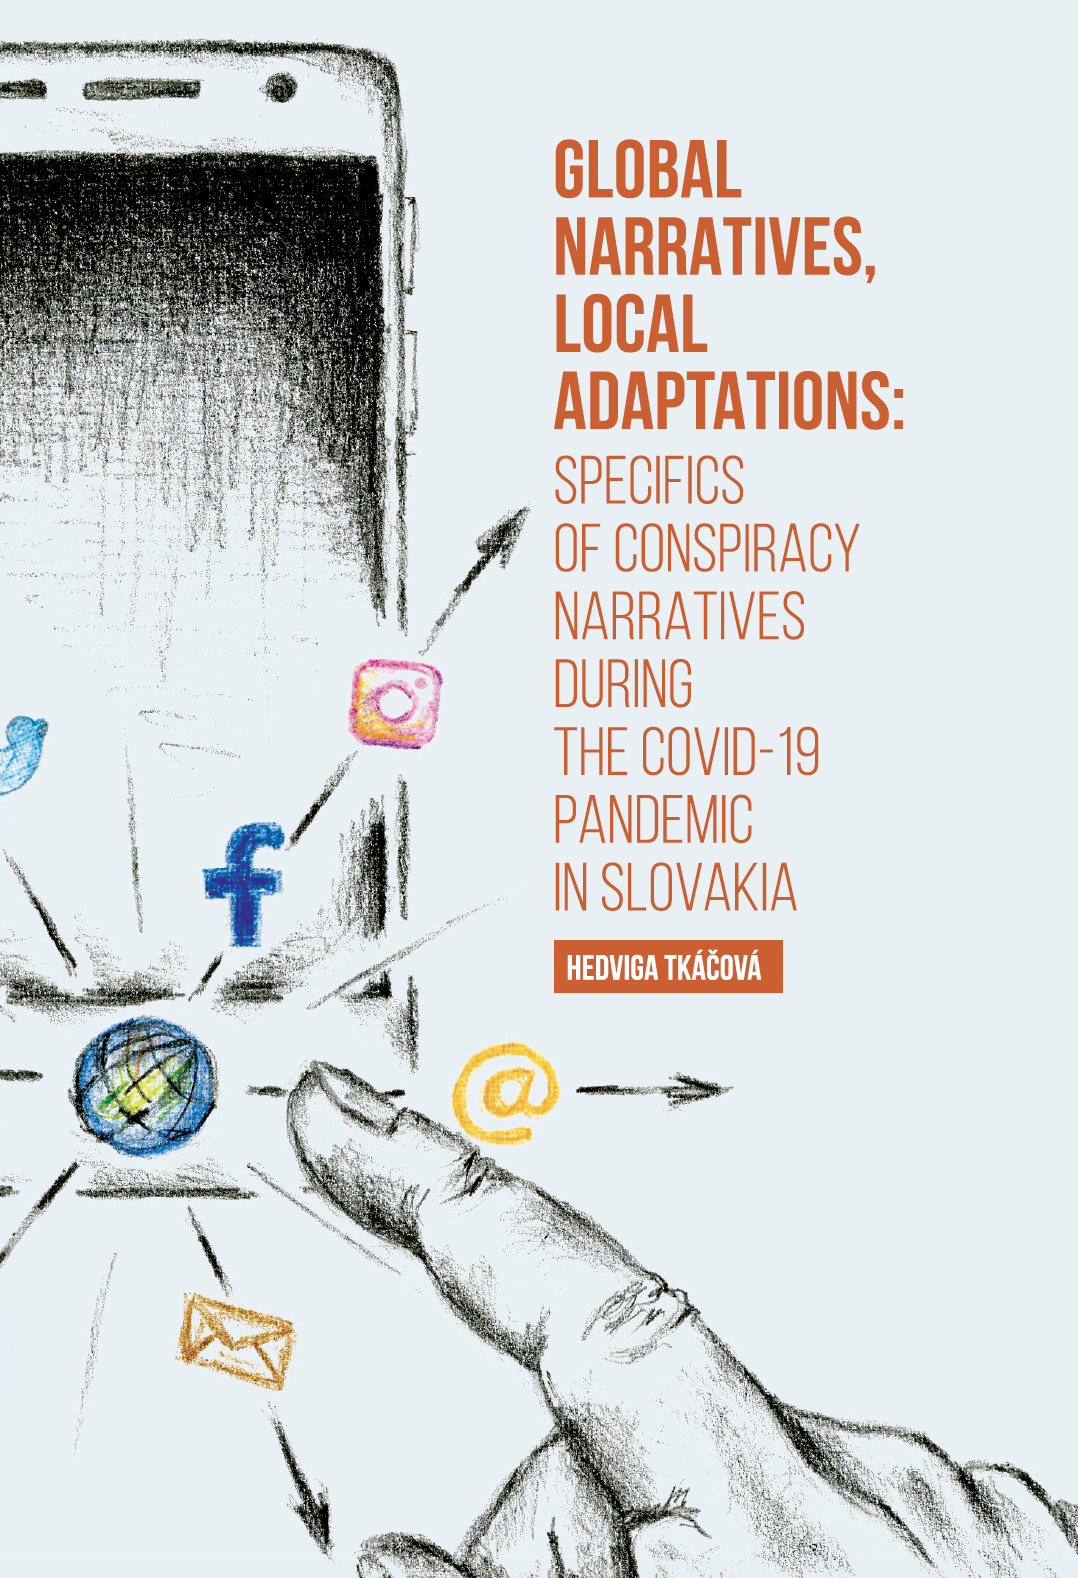 Global narratives, local adaptations. Specifics of conspiracy narratives during the COVID-19 pandemic in Slovakia.